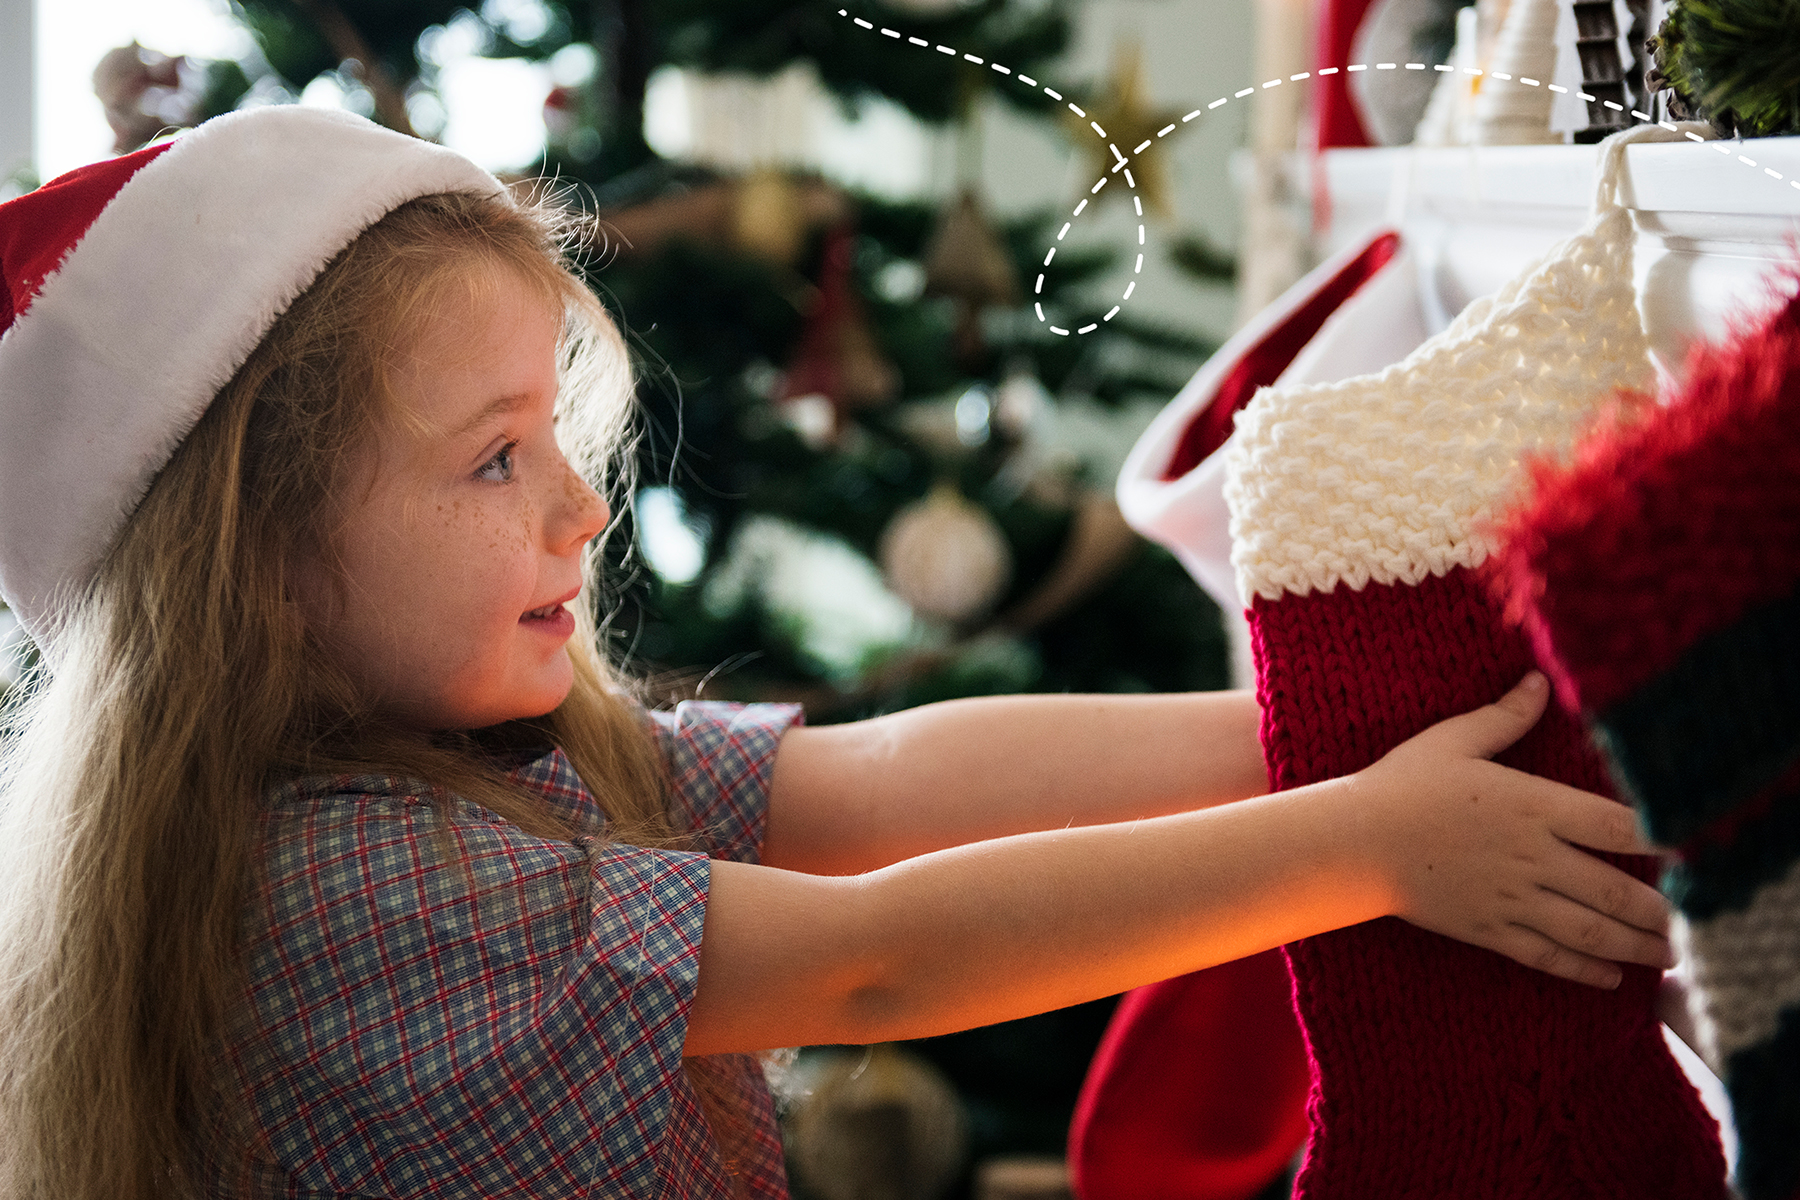 An photo of a little girl wearing a Santa hat and holding a stocking that is hooked onto a fireplace